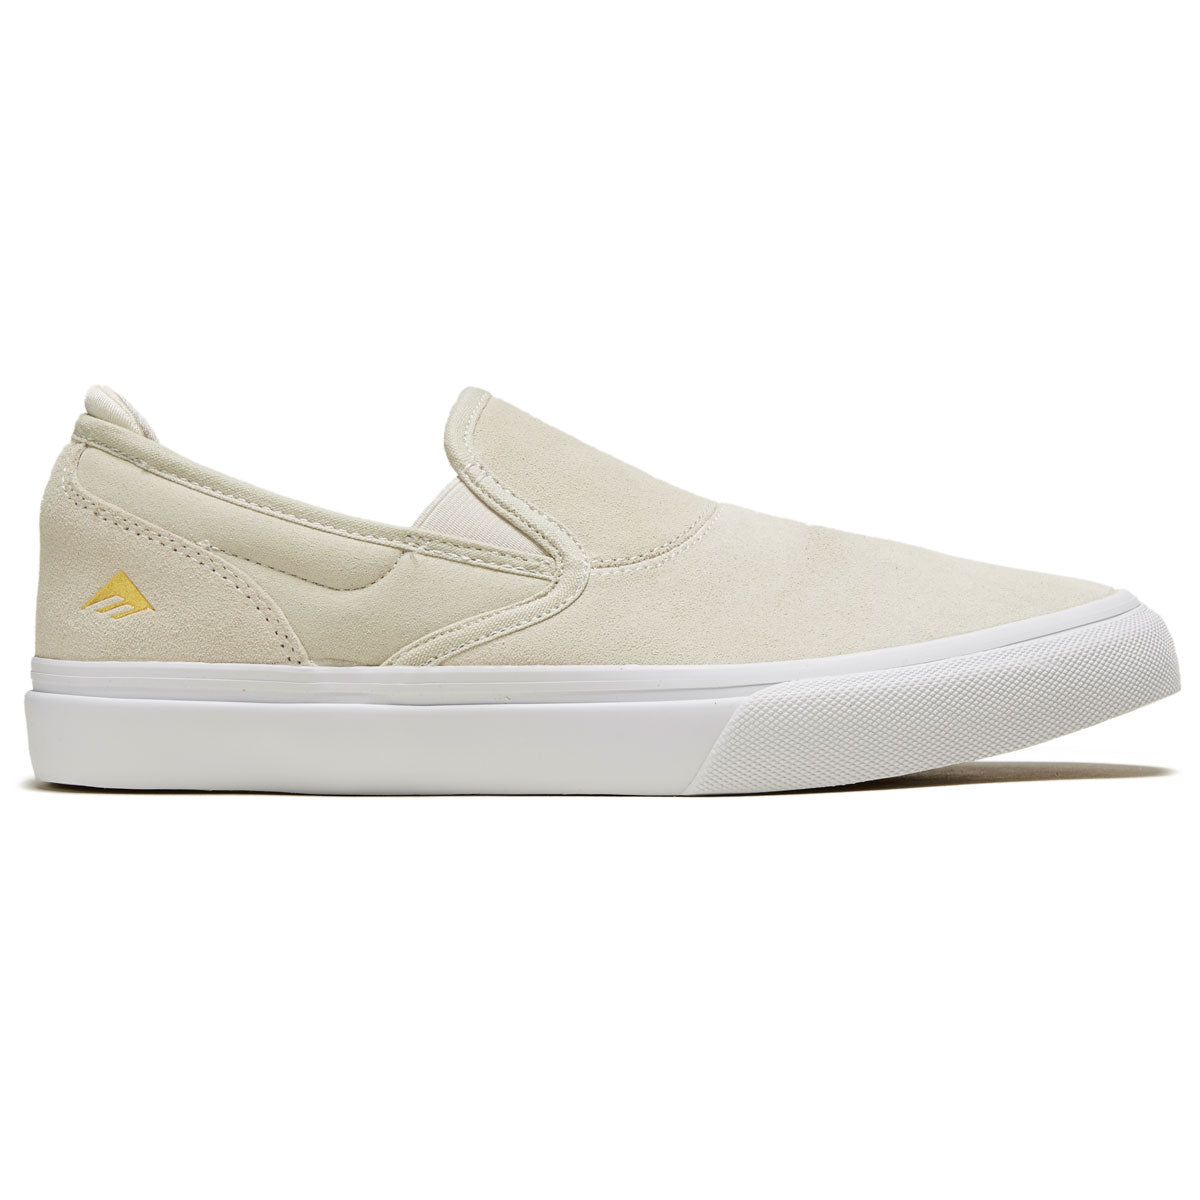 Emerica Wino G6 Slip-on This Is Skateboarding Shoes - White image 1